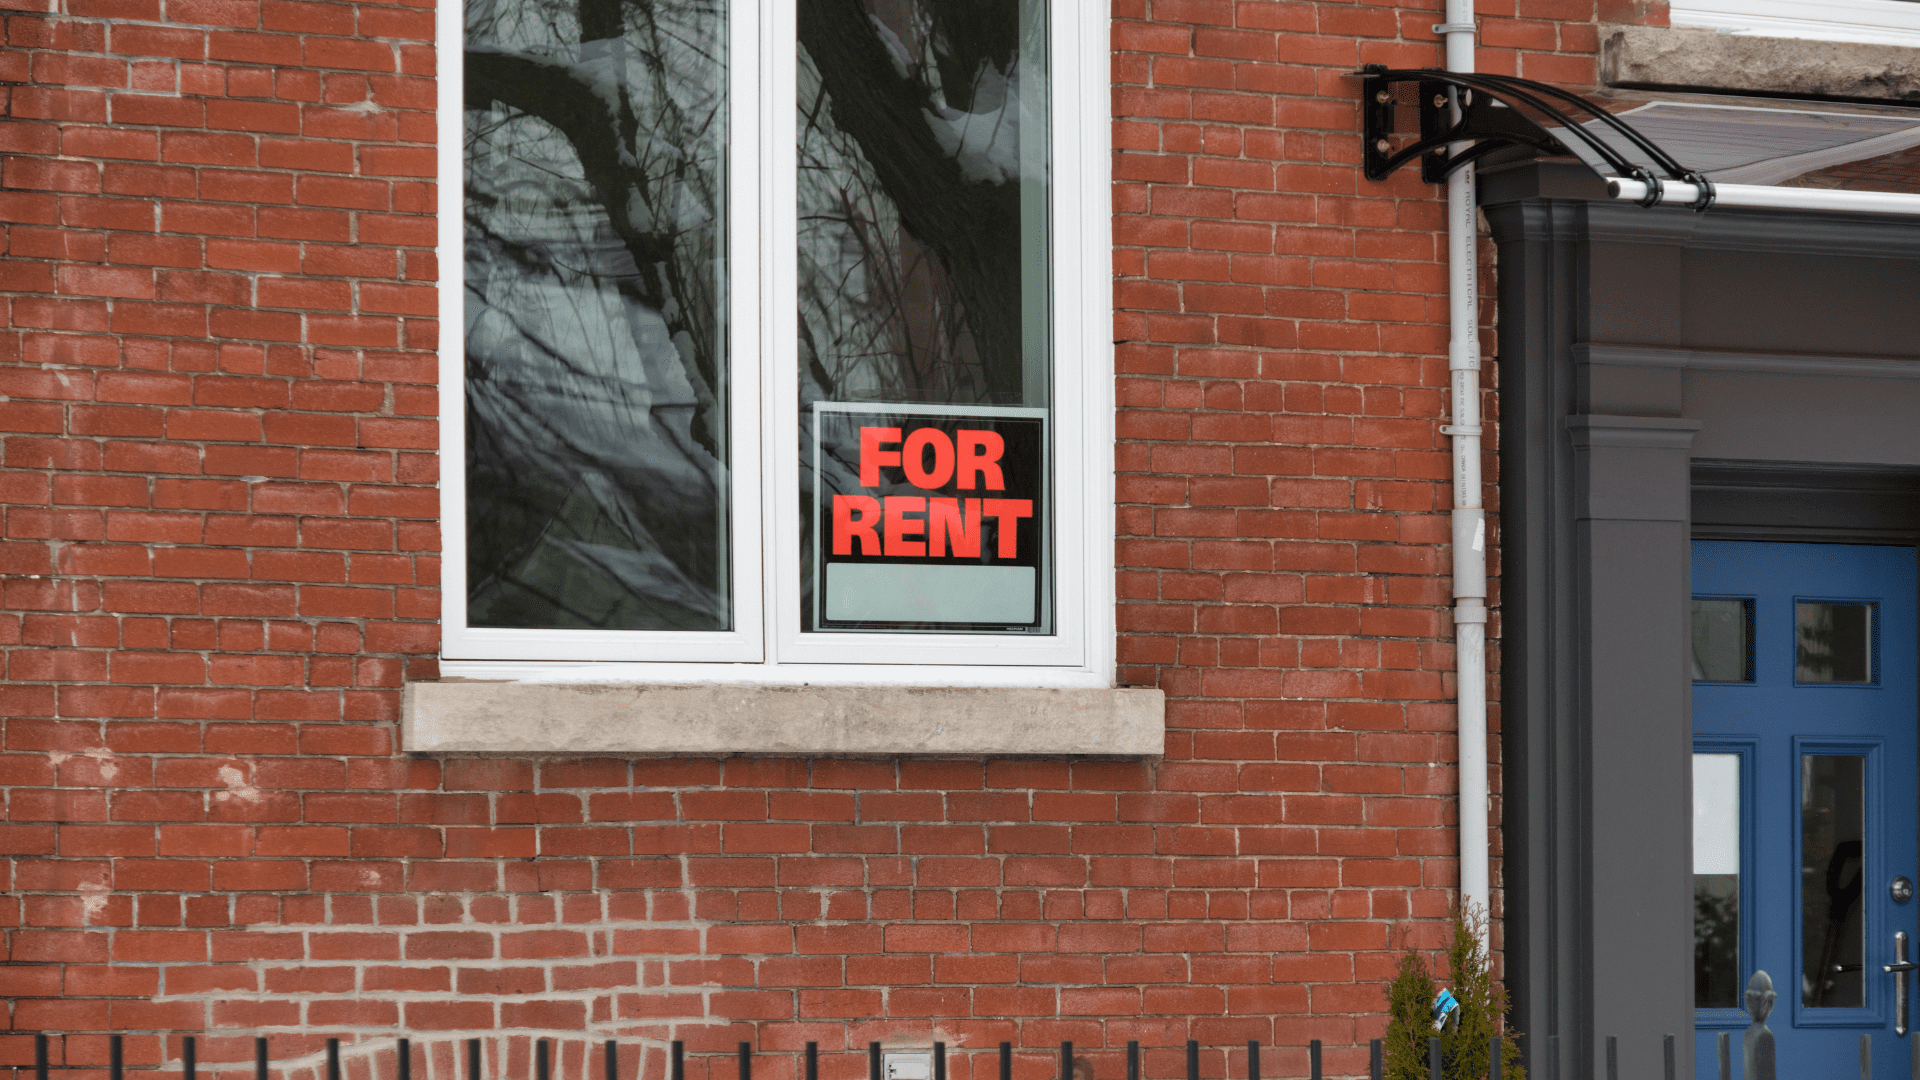 A bill that would allow tenants to stop paying rent when a landlord doesn't make critical repairs didn't make it out of committee Tuesday.